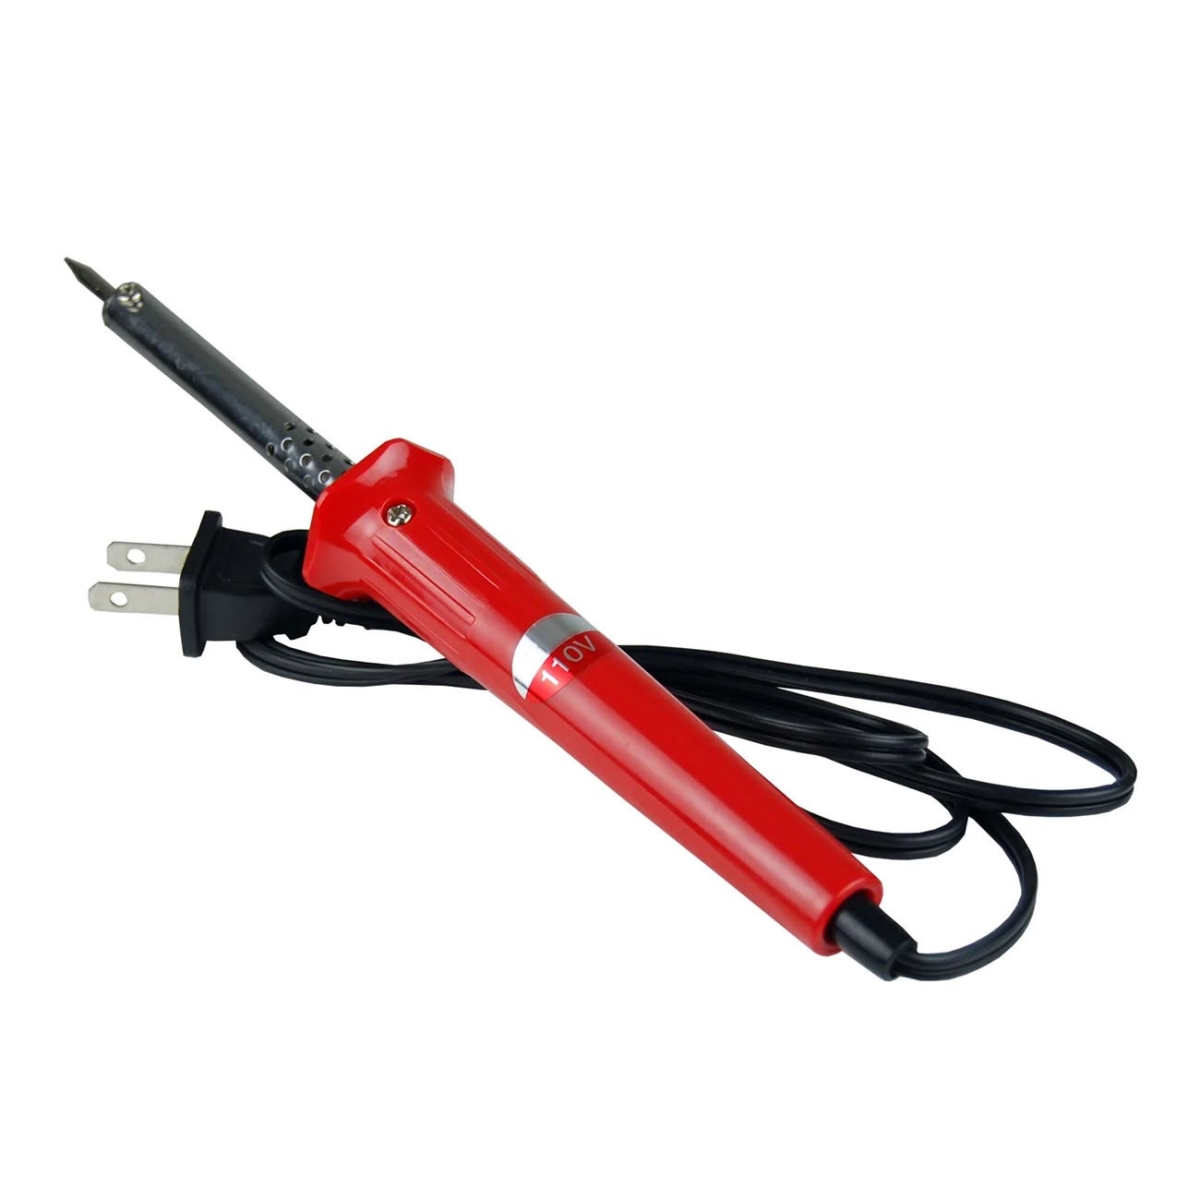 Picture of Nippon KTB60 60W Installation Solution Pencil Soldering Iron - 110V